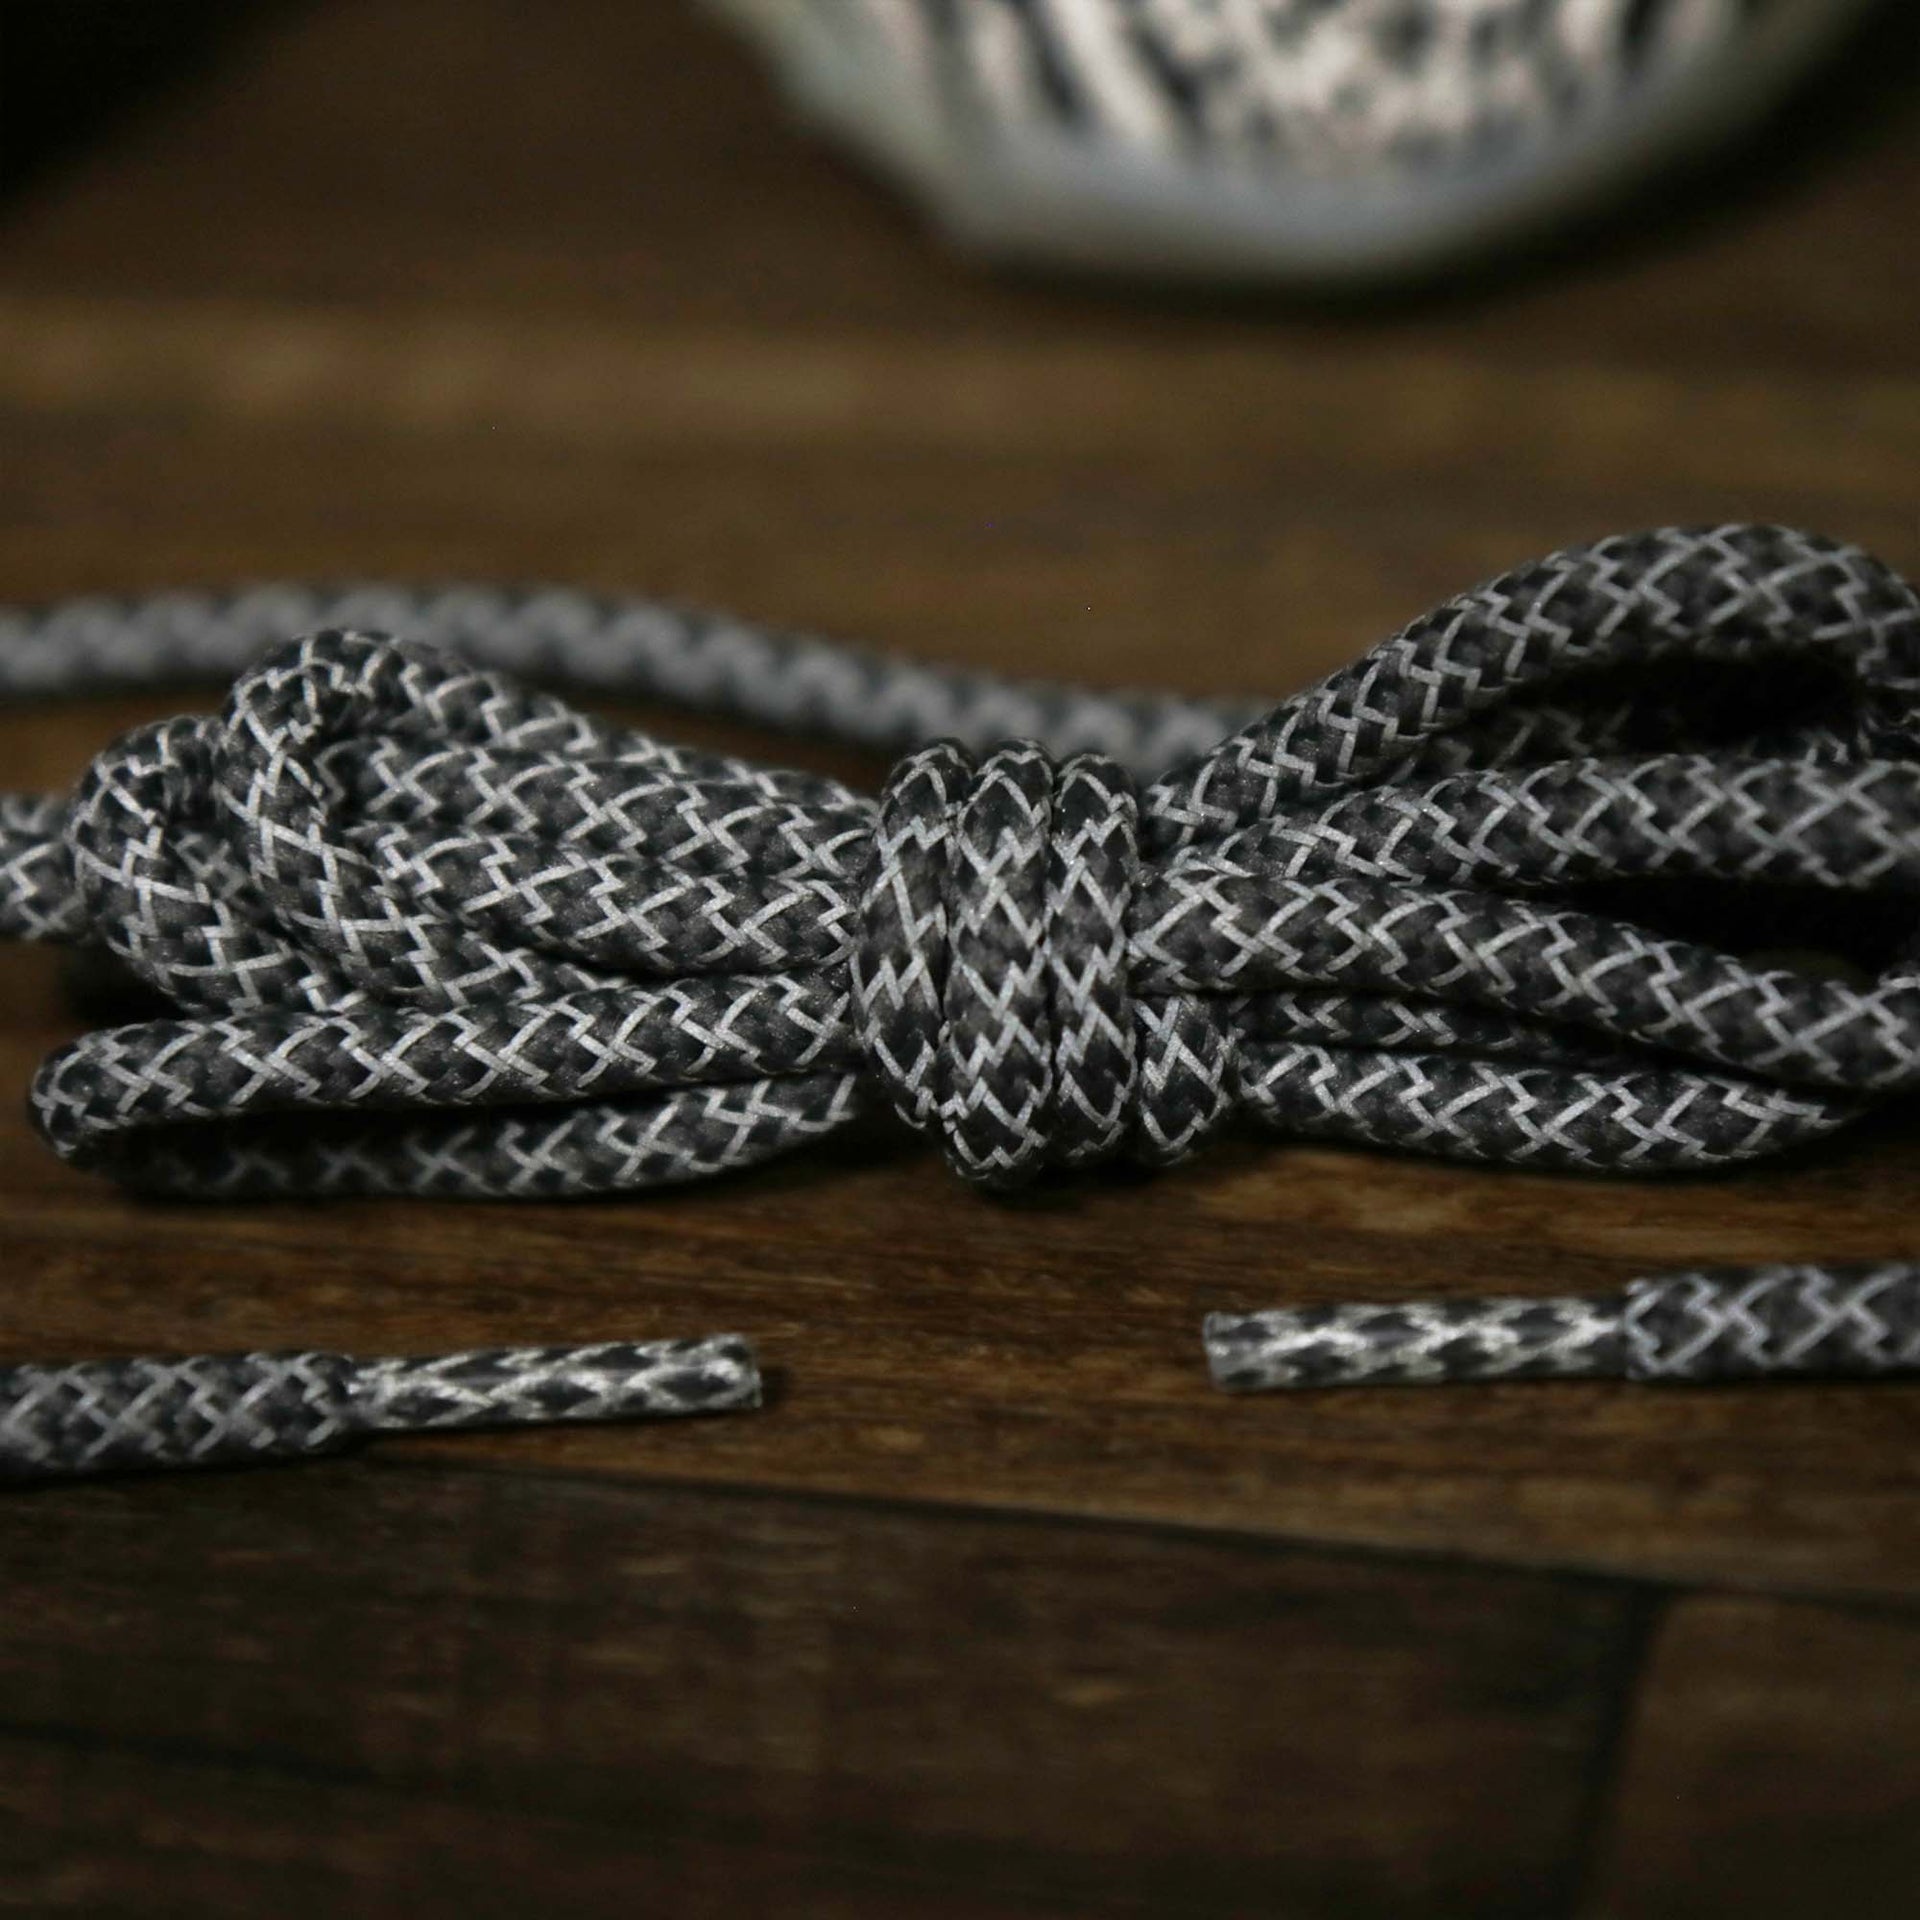 The 3M Reflective Dark Grey Solid Shoelaces with Dark Grey Aglets | 120cm Capswag unfolded